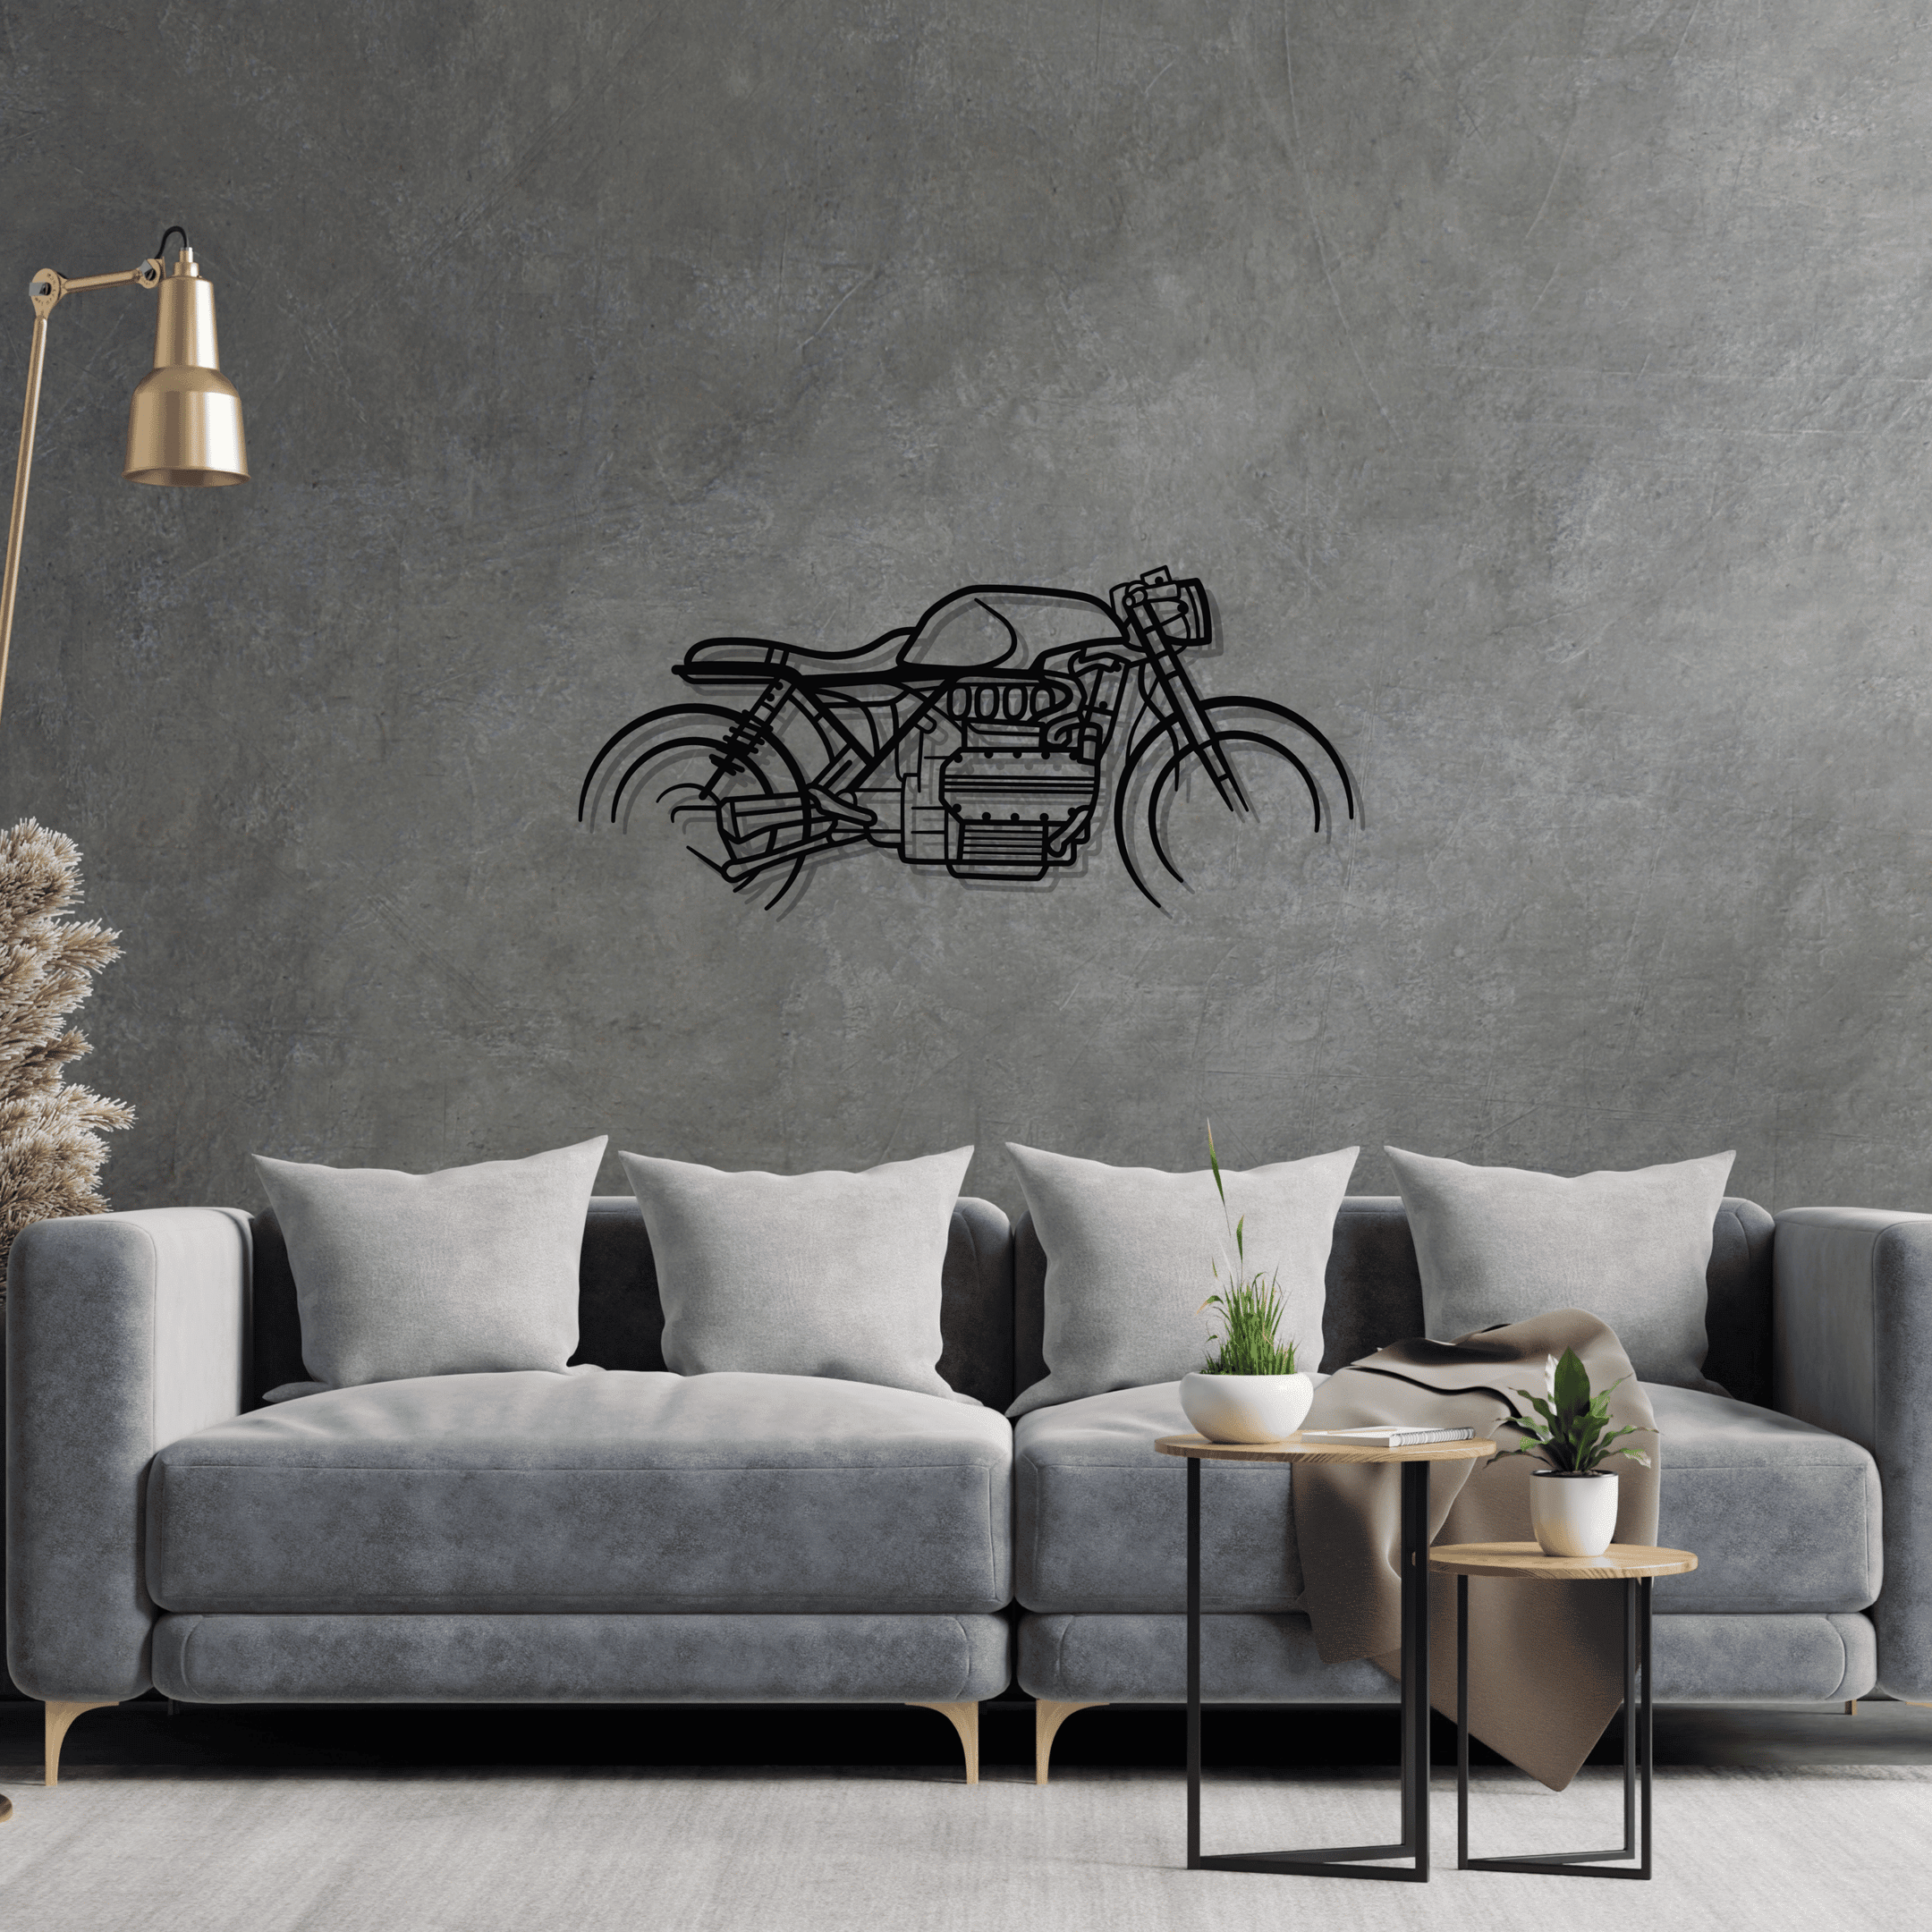 K1100 Cafe Racer Metal Silhouette Wall Art Active, Custom Metal Sport Car Silhouette Wall Art - Garage Wall Decor Gift For Him